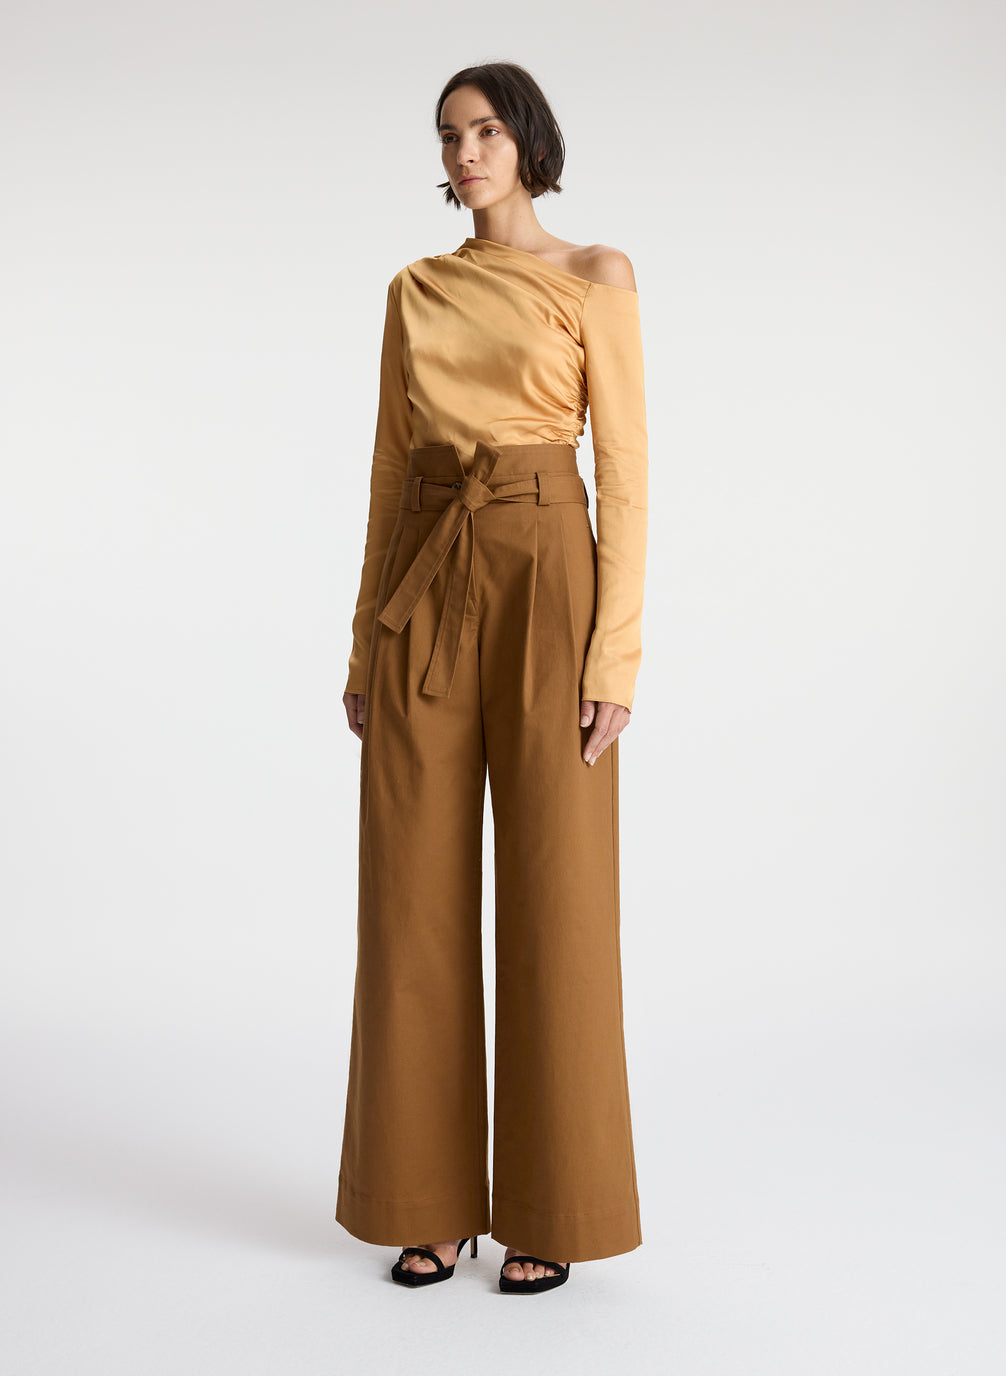 side view of woman wearing tan one shoulder long sleeve top and brown wide leg pants